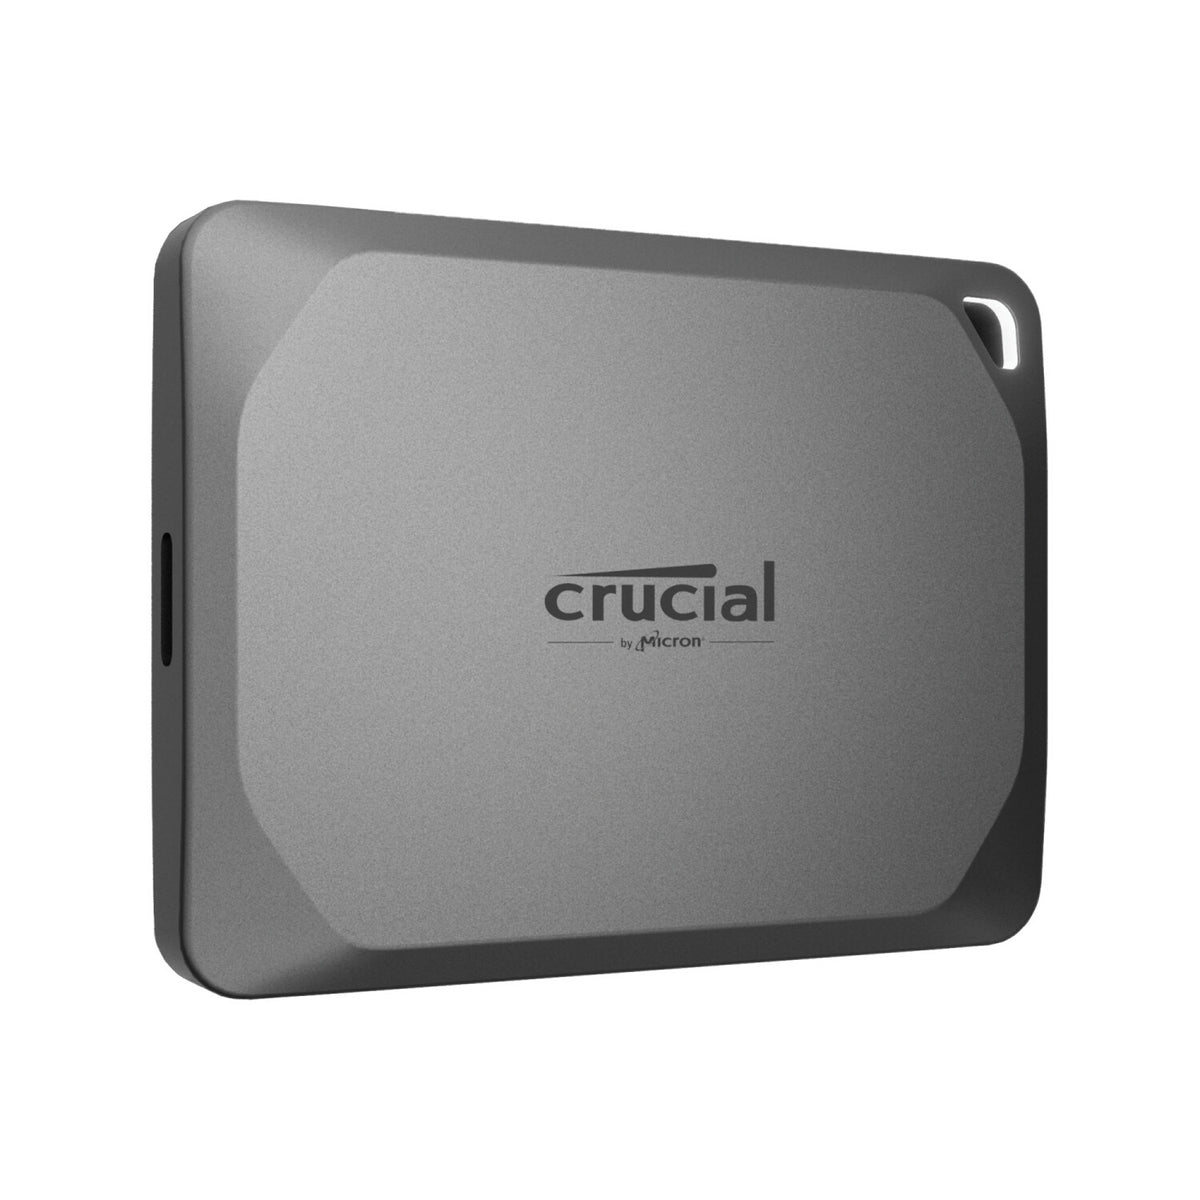 Crucial X9 Pro External solid state drive - 2 TB